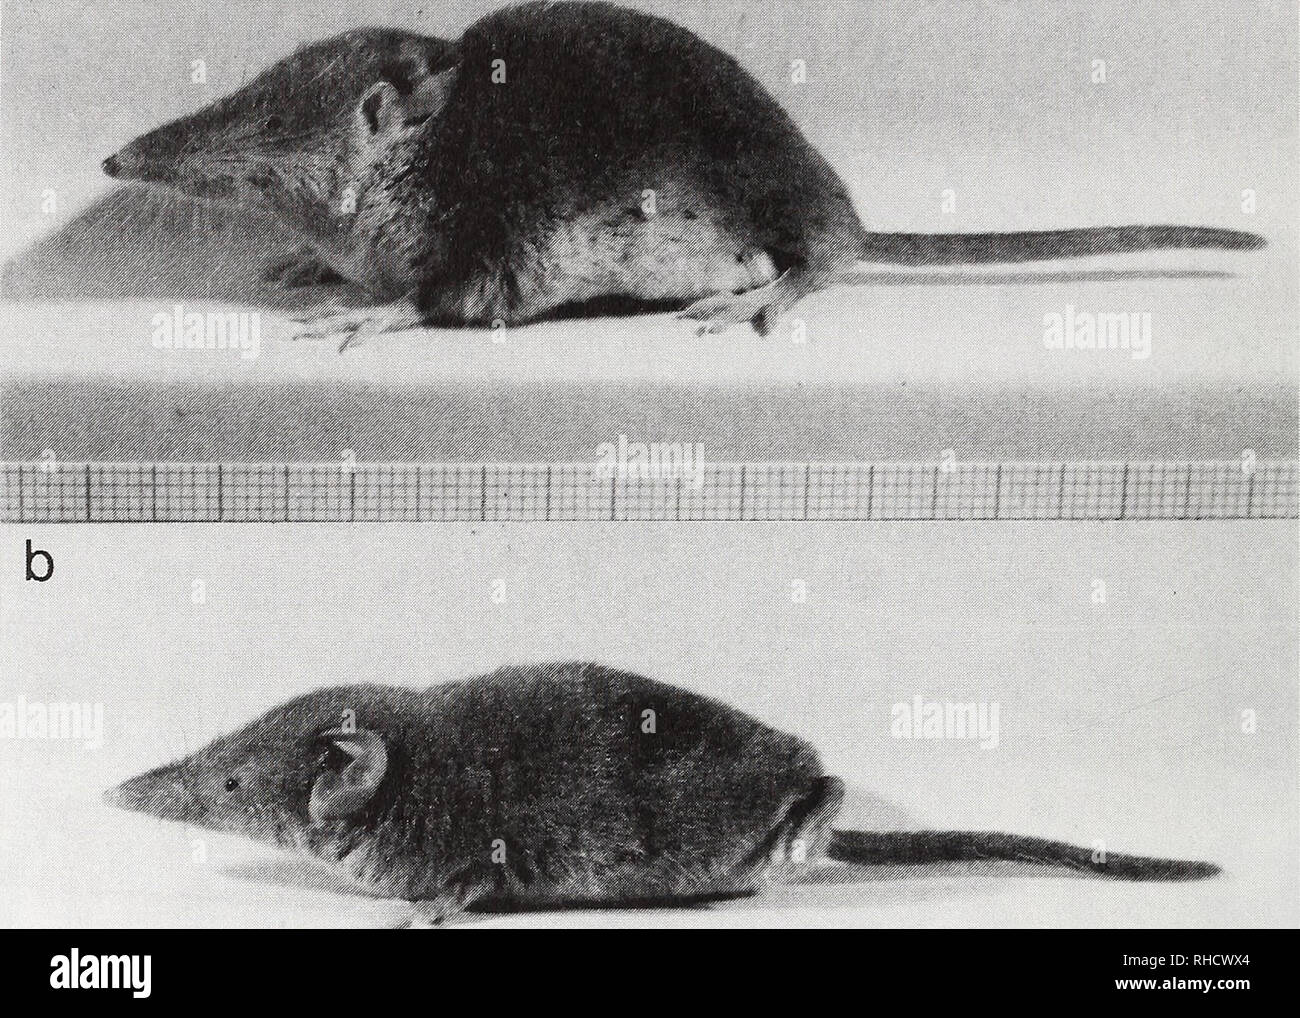 . Bonner zoologische Beiträge : Herausgeber: Zoologisches Forschungsinstitut und Museum Alexander Koenig, Bonn. Biology; Zoology. 342 P. Vogel &amp; T. Sofianidou a. Fig. 2: Shrews from Lesbos: a) C. leucodon (IZEA 4153); b) C. suaveolens (IZEA 4154). but also along irrigation pipes, inducing a more luxurious vegetation. In this type of habitat we captured twice both species in neighbouring traps 5 to 10 m apart from each other. Obviously, the two species occur not only in syntopy, but even at a similar frequency (3:4) Discussion For the first time our karyological results show unequivocally t Stock Photo